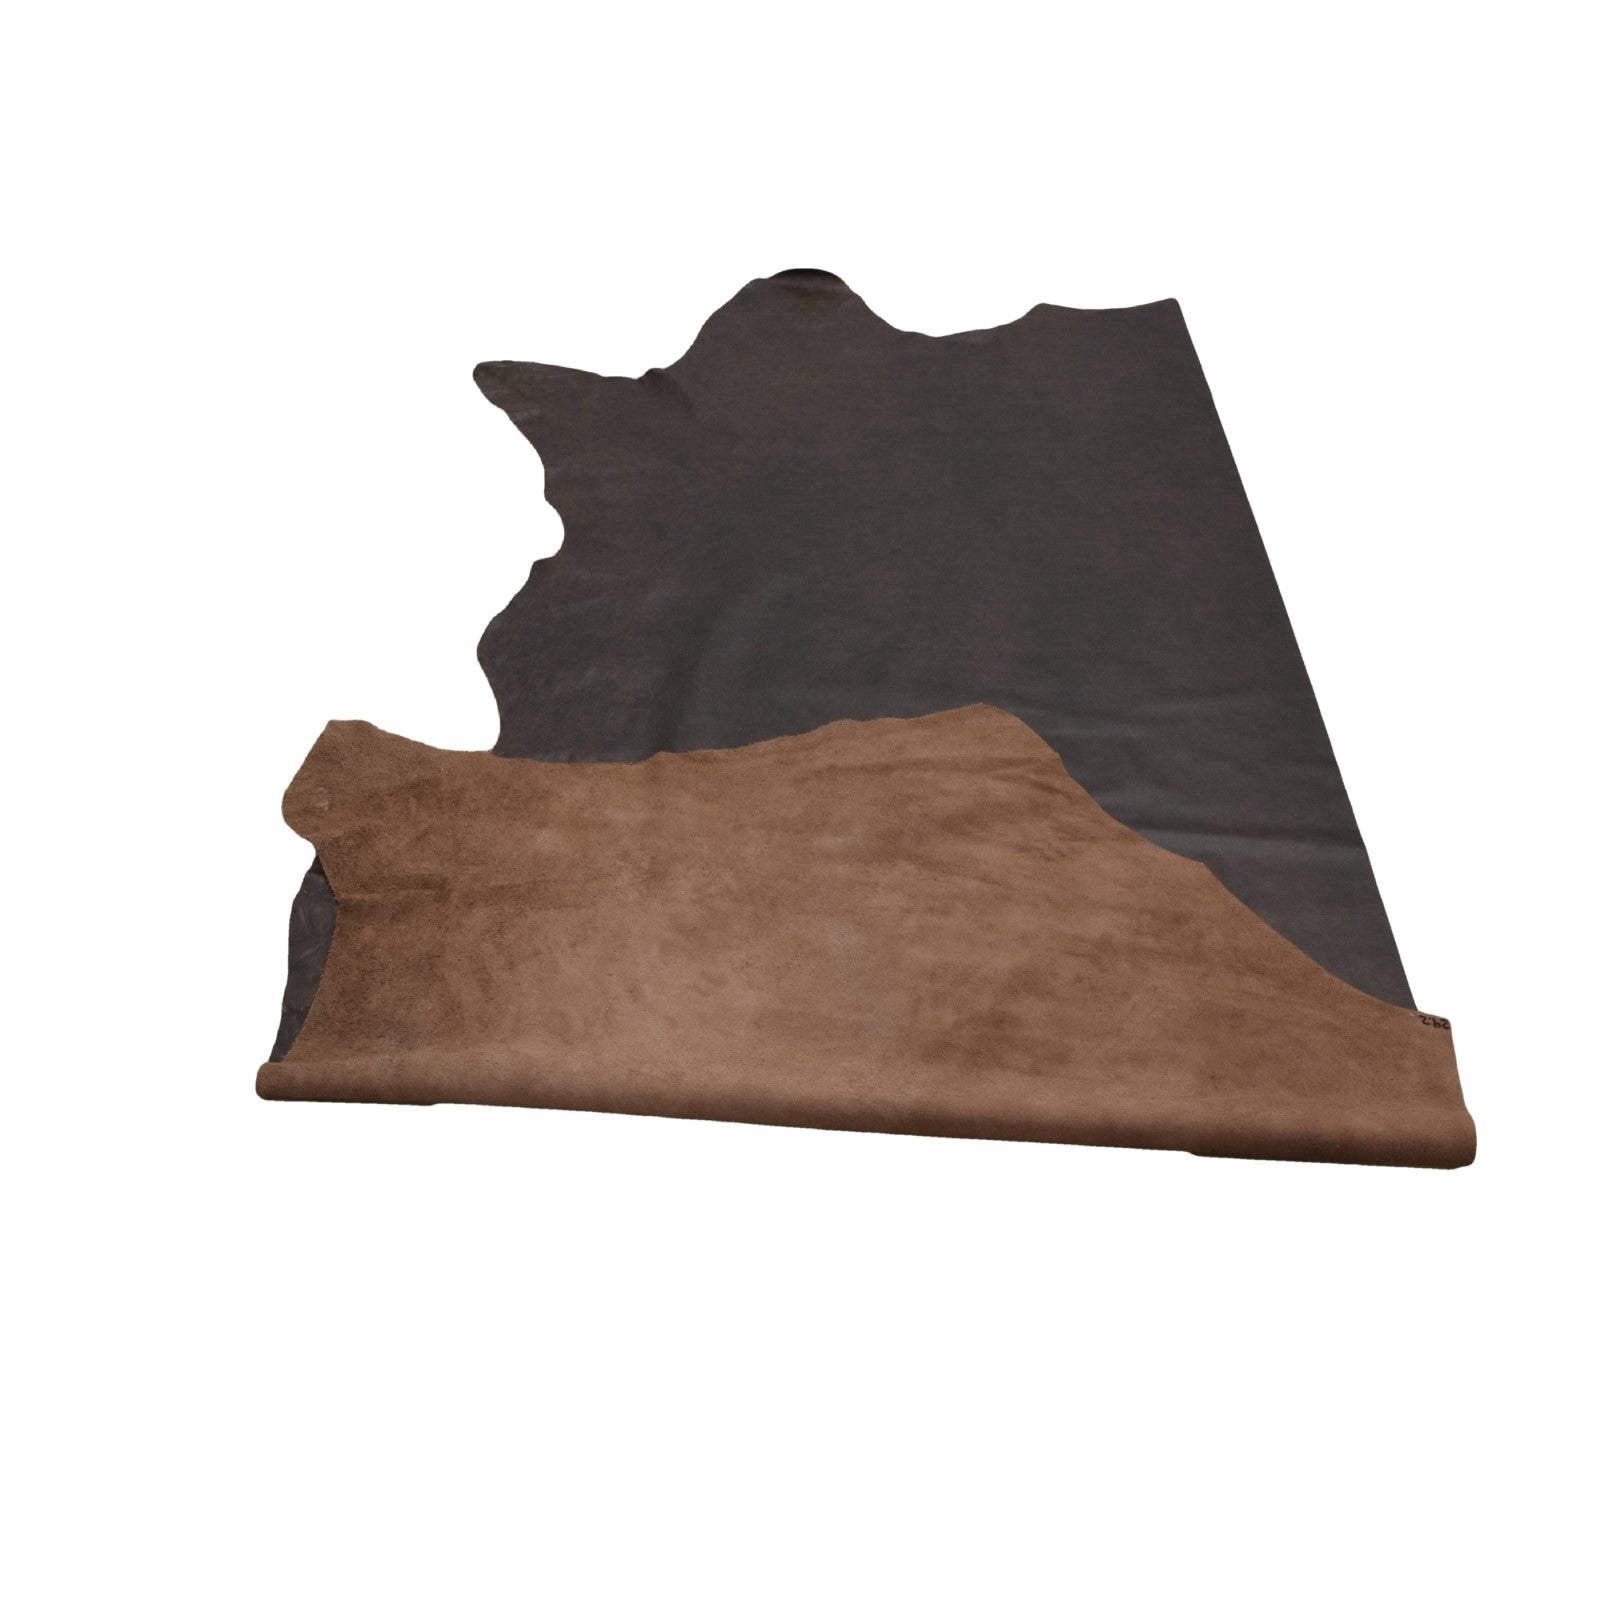 Dive Bomb Dark Brown, 2-3 oz Cow Hides, Vintage Bomber Browns,  | The Leather Guy